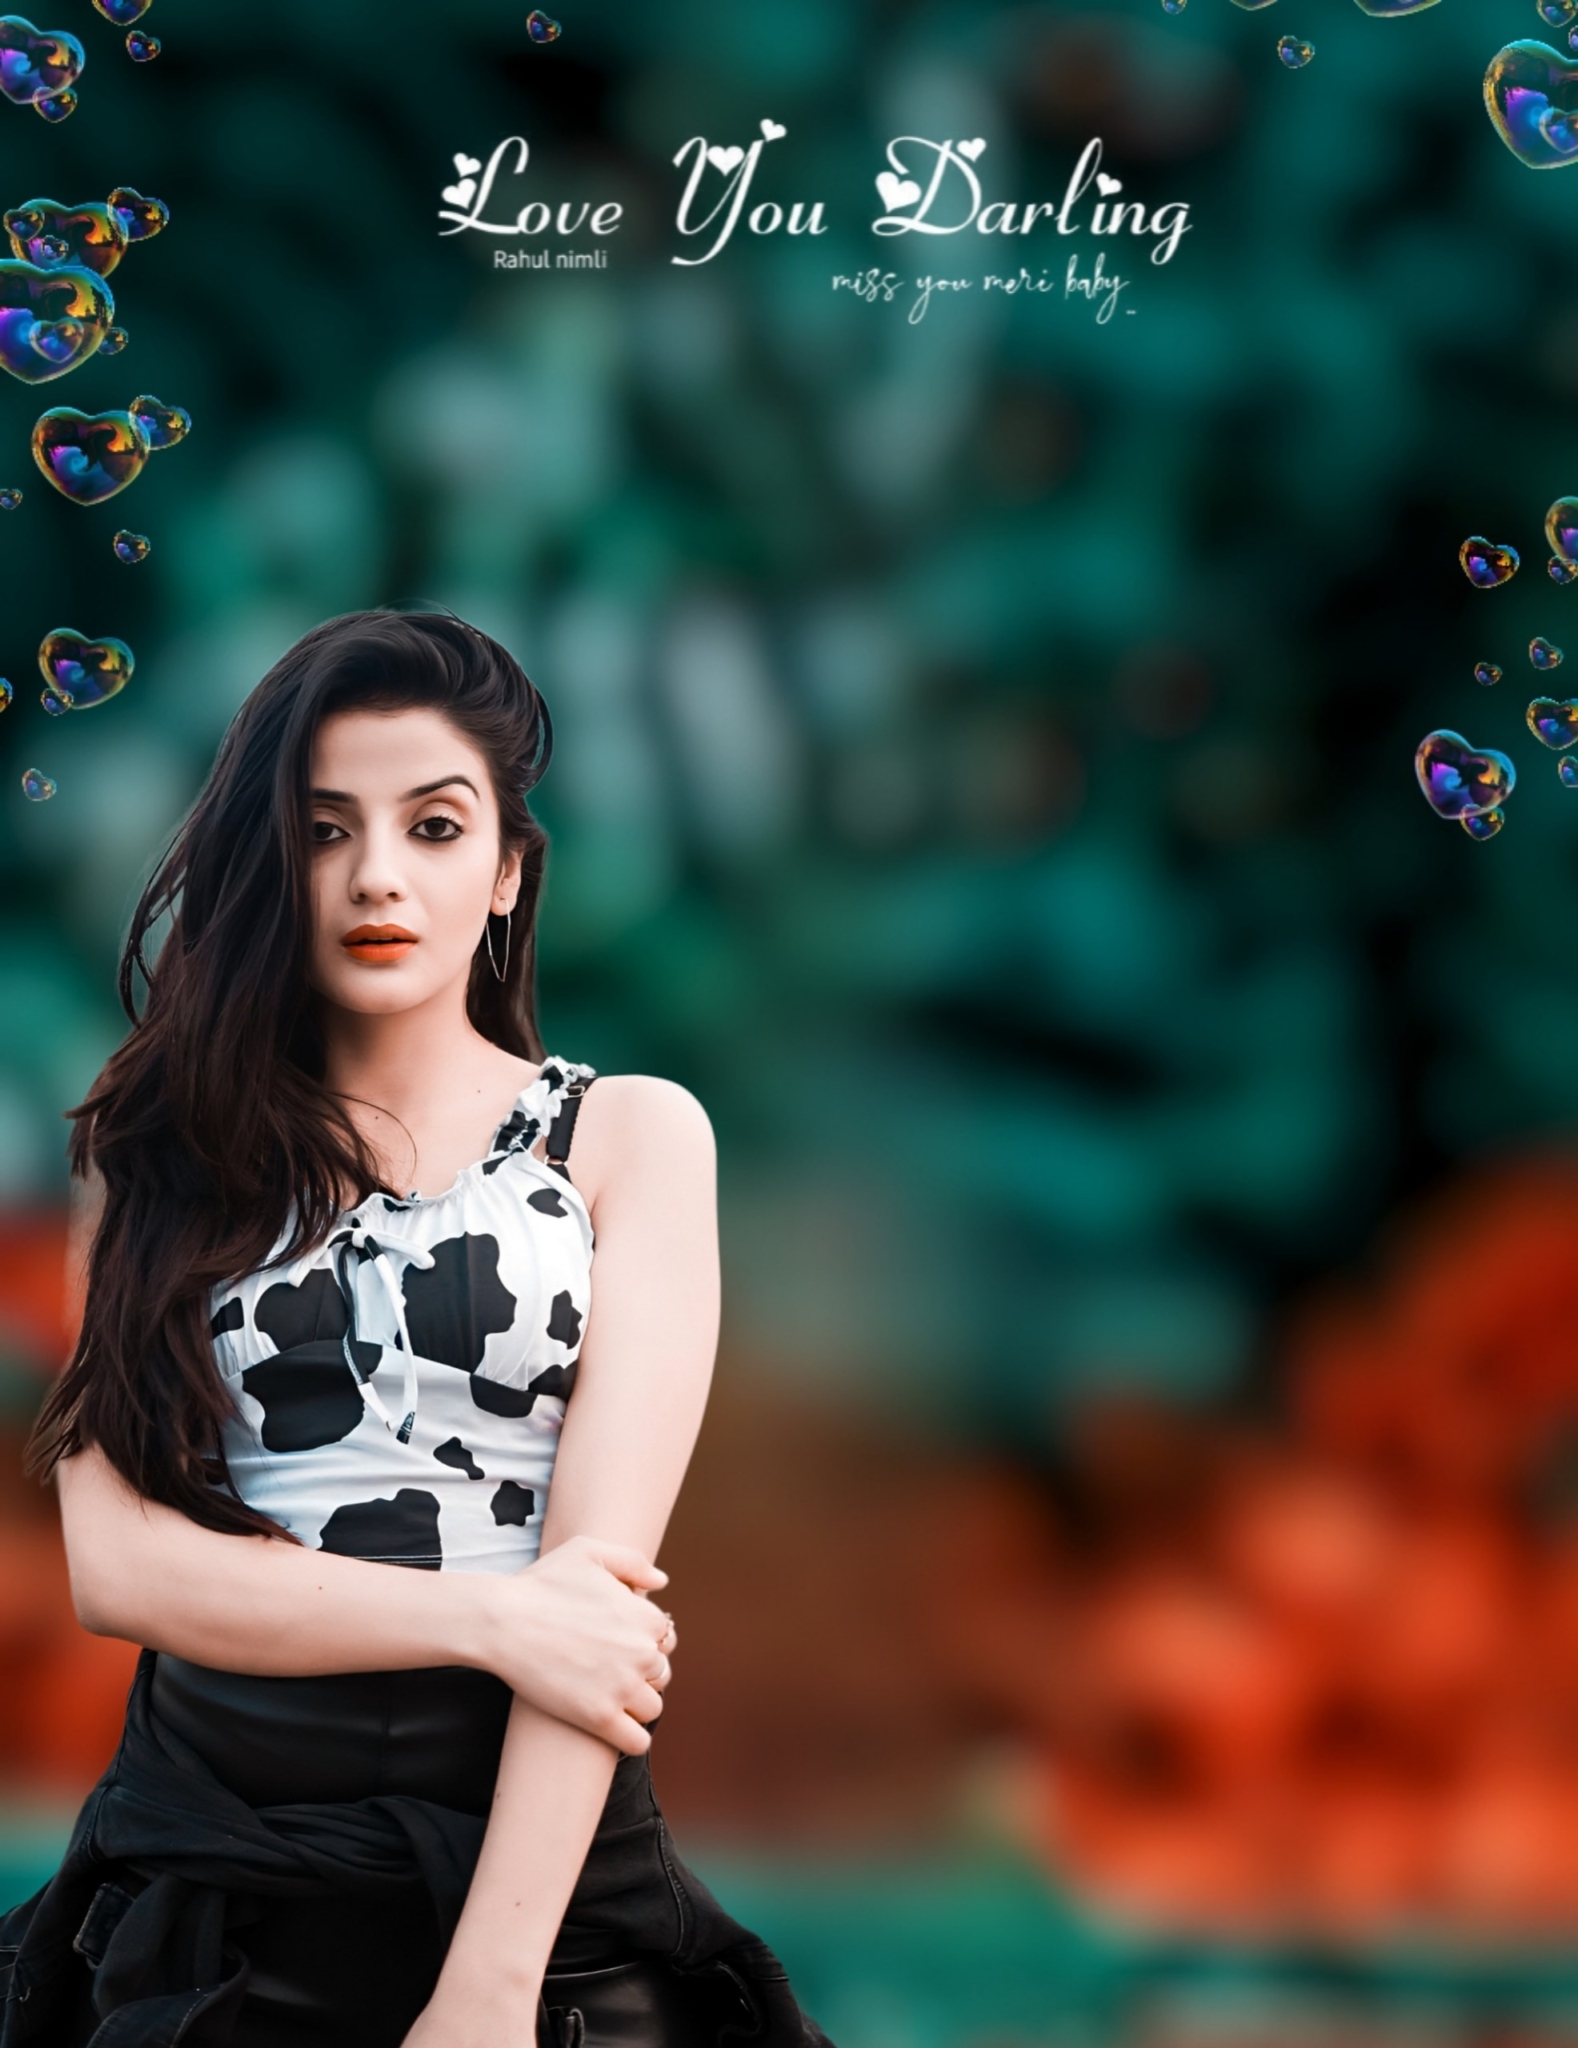 Girl Background HD For Picsart Editing